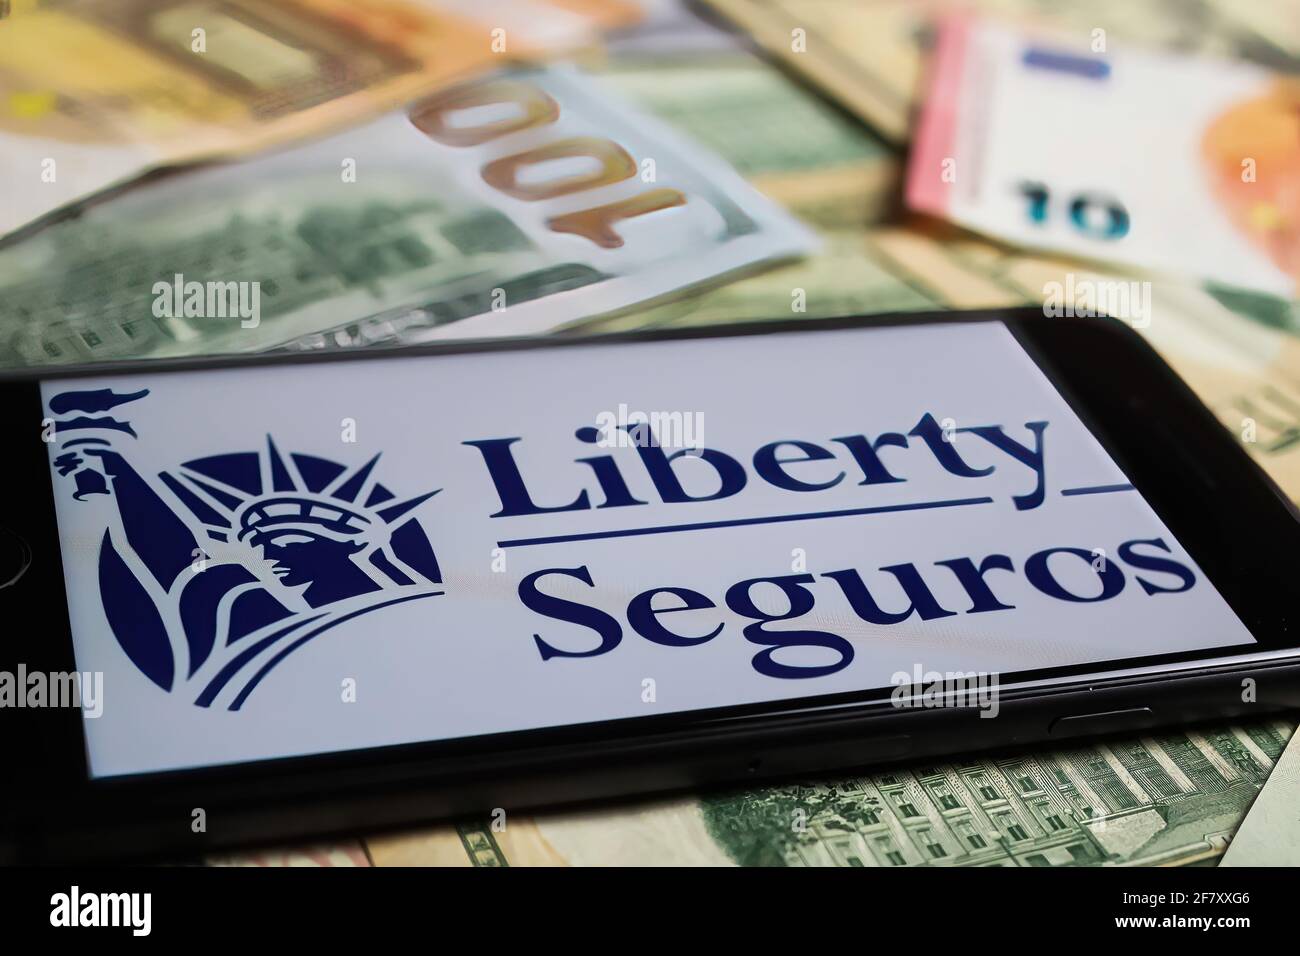 Viersen, Germany - March 1. 2021: Closeup of smartphone with logo lettering of liberty seguros insurance company on paper money currency Stock Photo